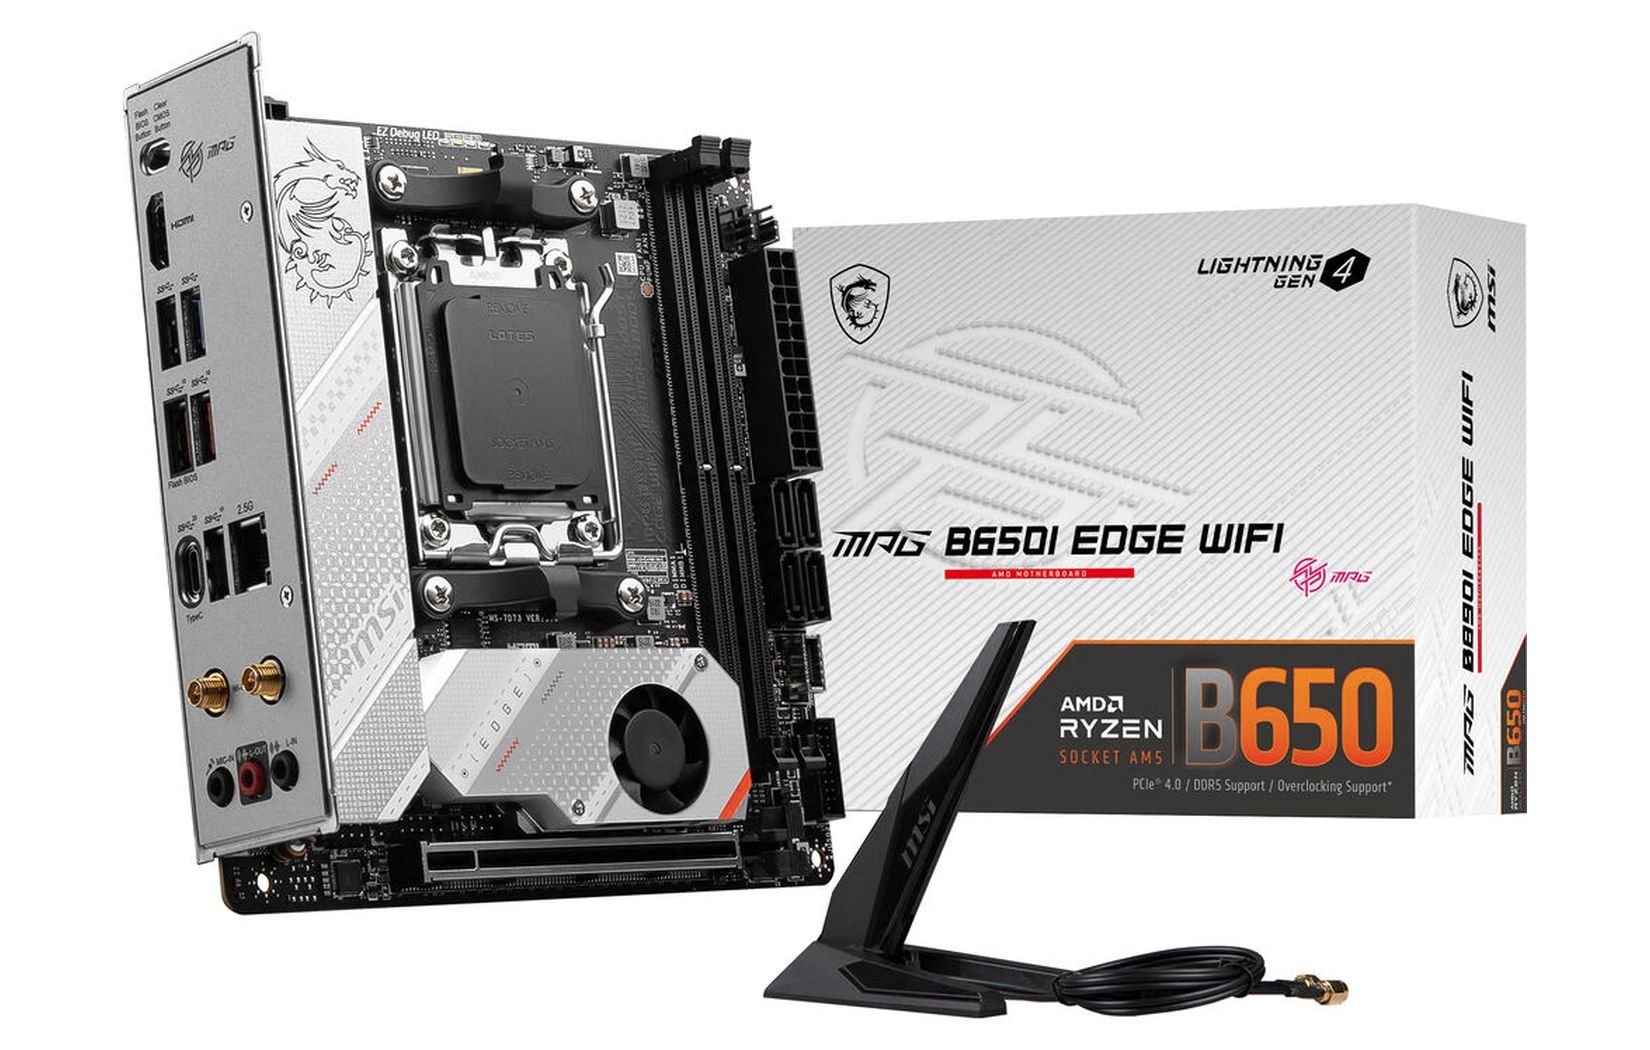 MSI AMD B650 motherboard pricing leaks out, starts at 189 USD 